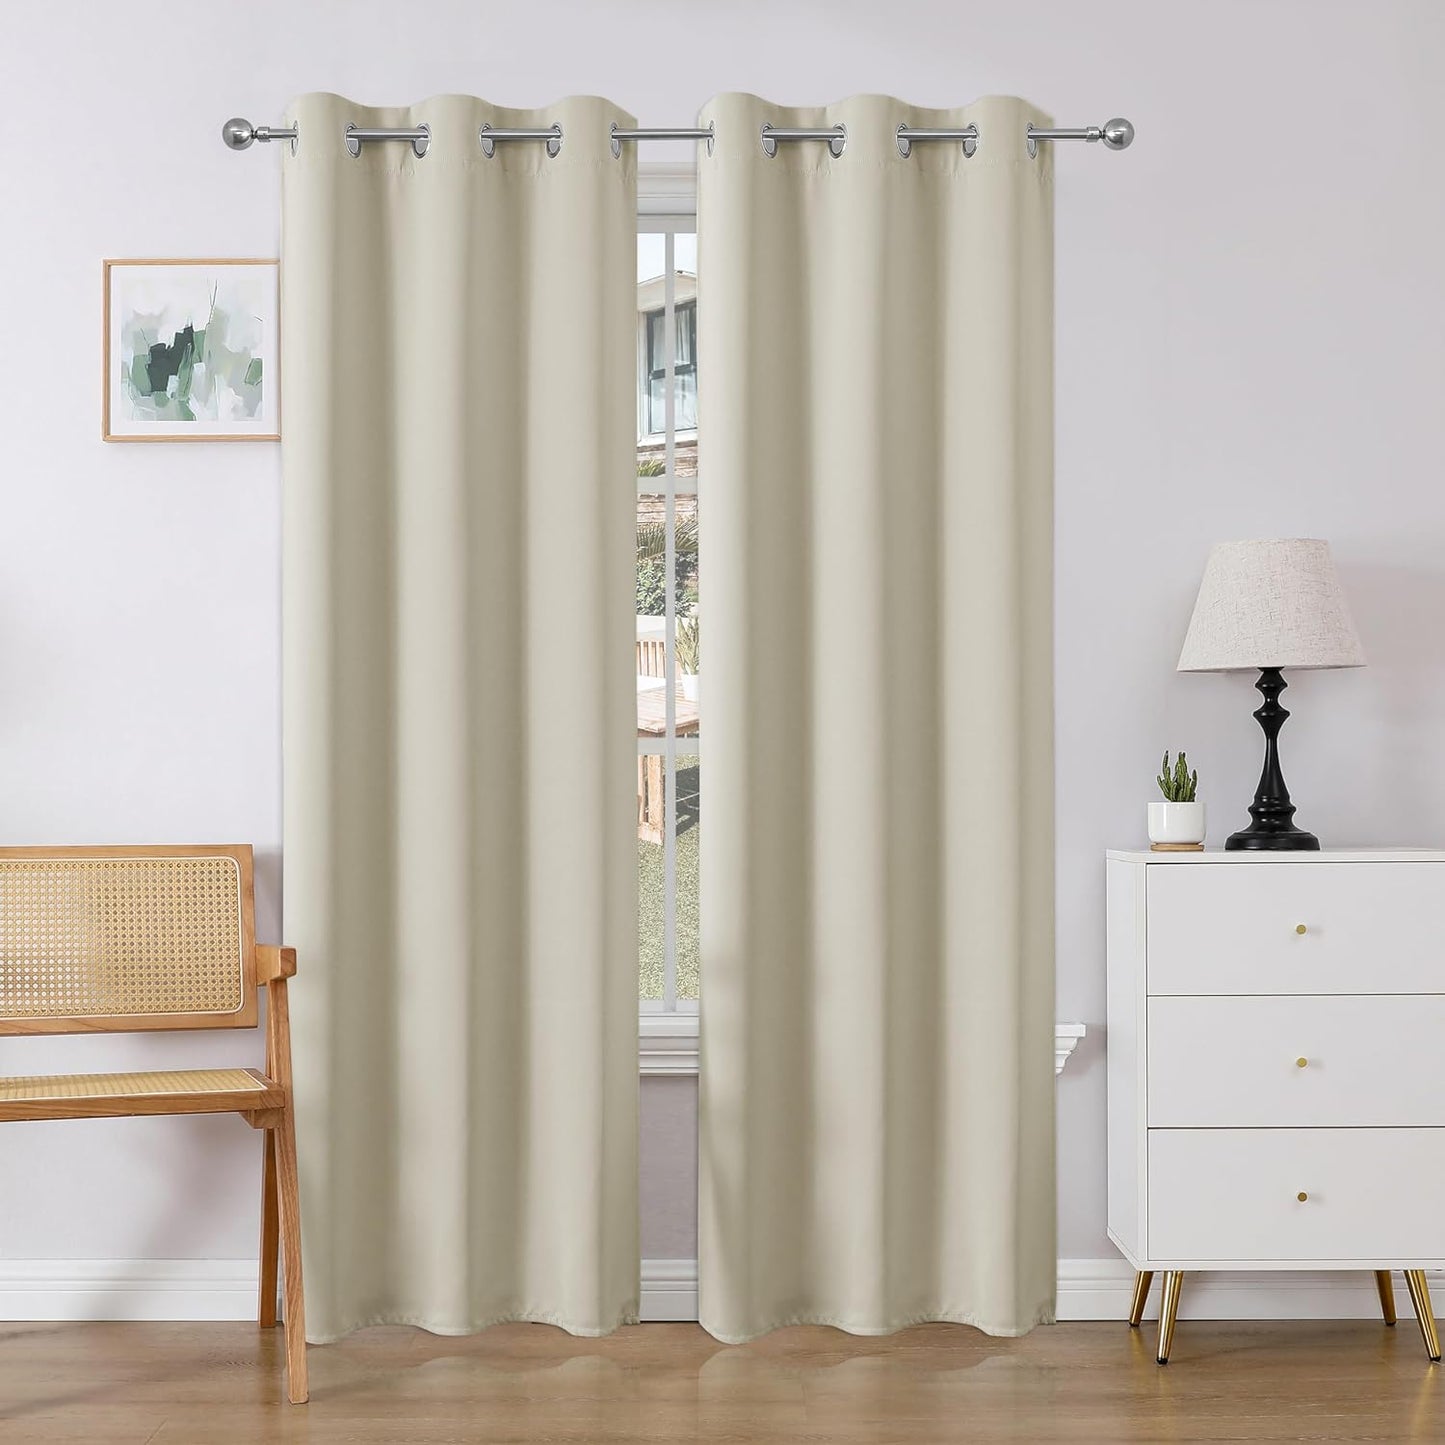 Joydeco Blackout Curtains 84 Inch Length 2 Panels Set, Thermal Insulated Long Curtains& Drapes 2 Burg, Room Darkening Grommet Curtains for Bedroom Living Room Window (Black, W52 X L84 Inch)  Joydeco Light Beige 40W X 78L Inch X 2 Panels 